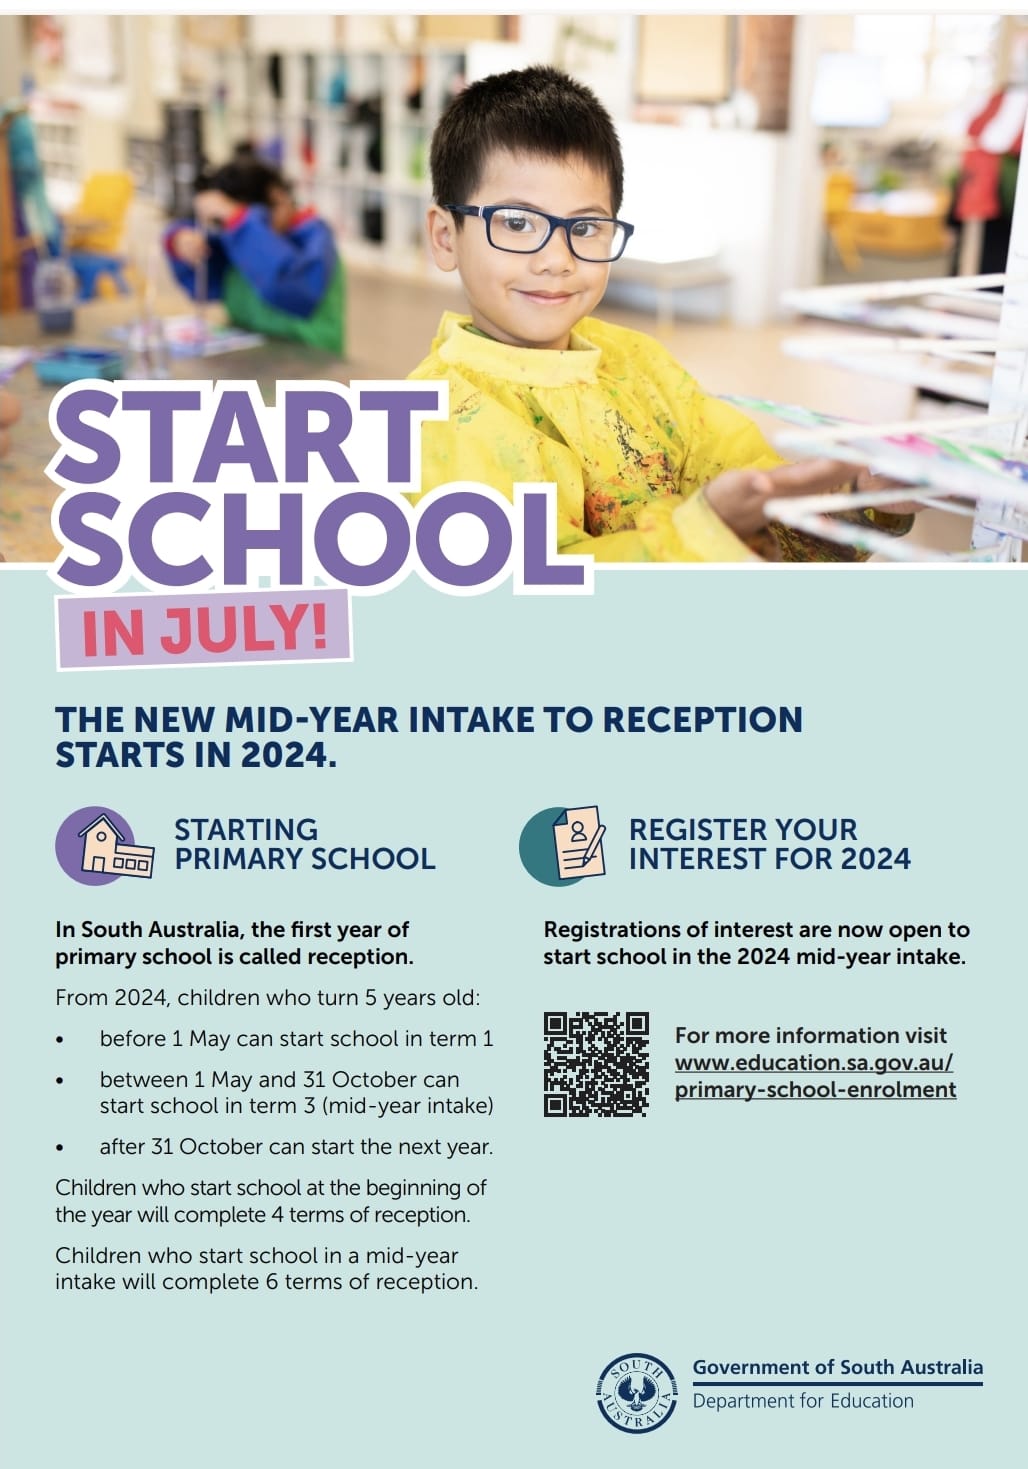 South Australian Department for Education - DFE - Introduces Mid-Year Intakes for Reception